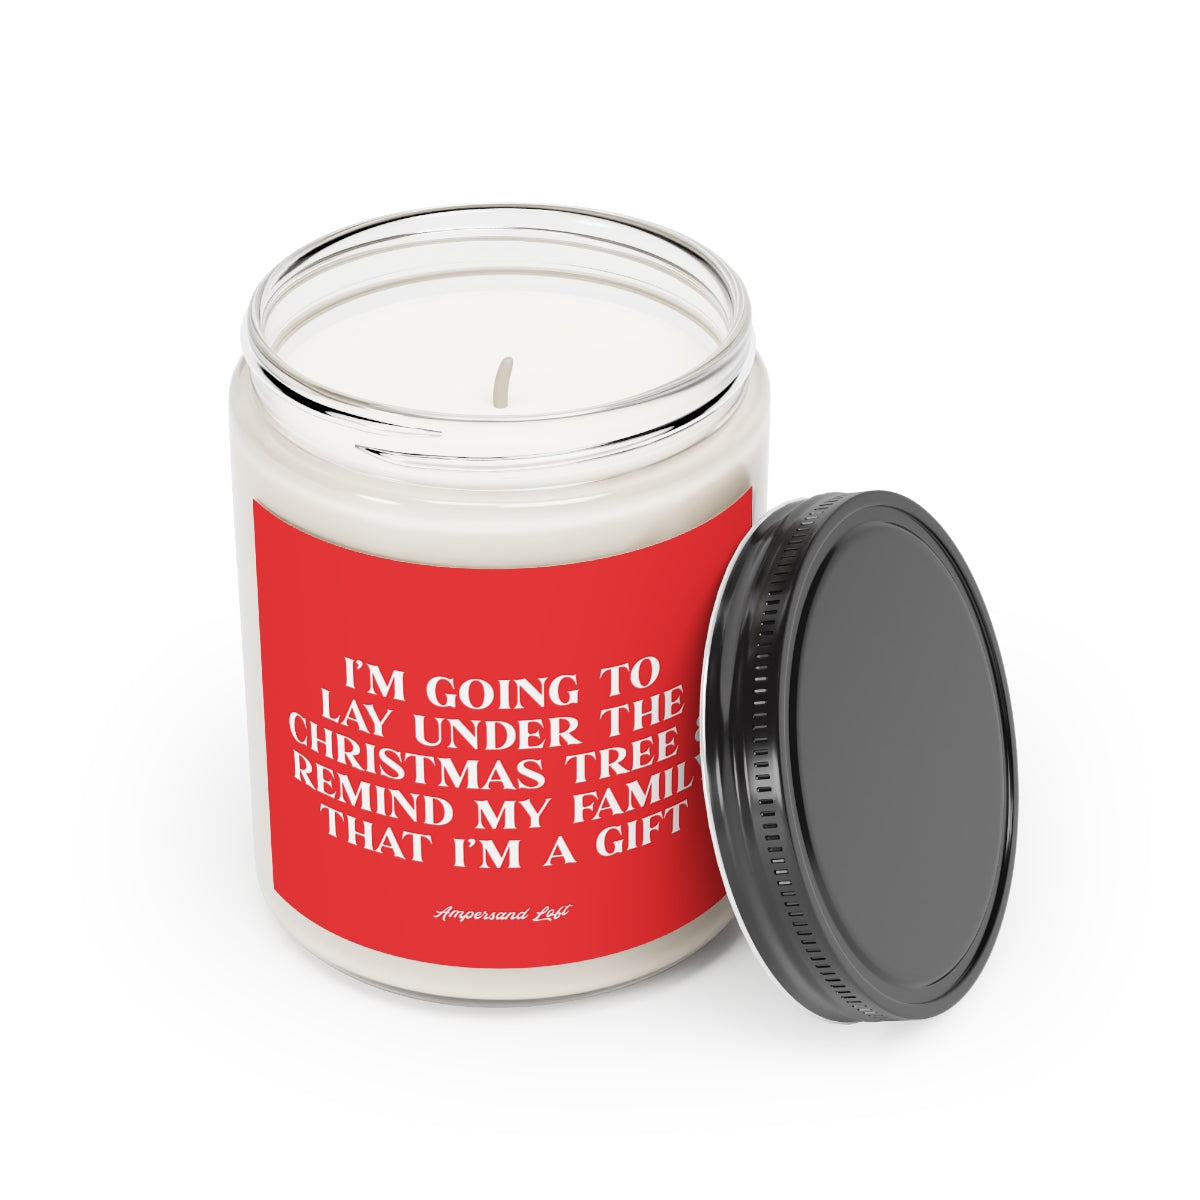 I'm A Gift Scented Candle